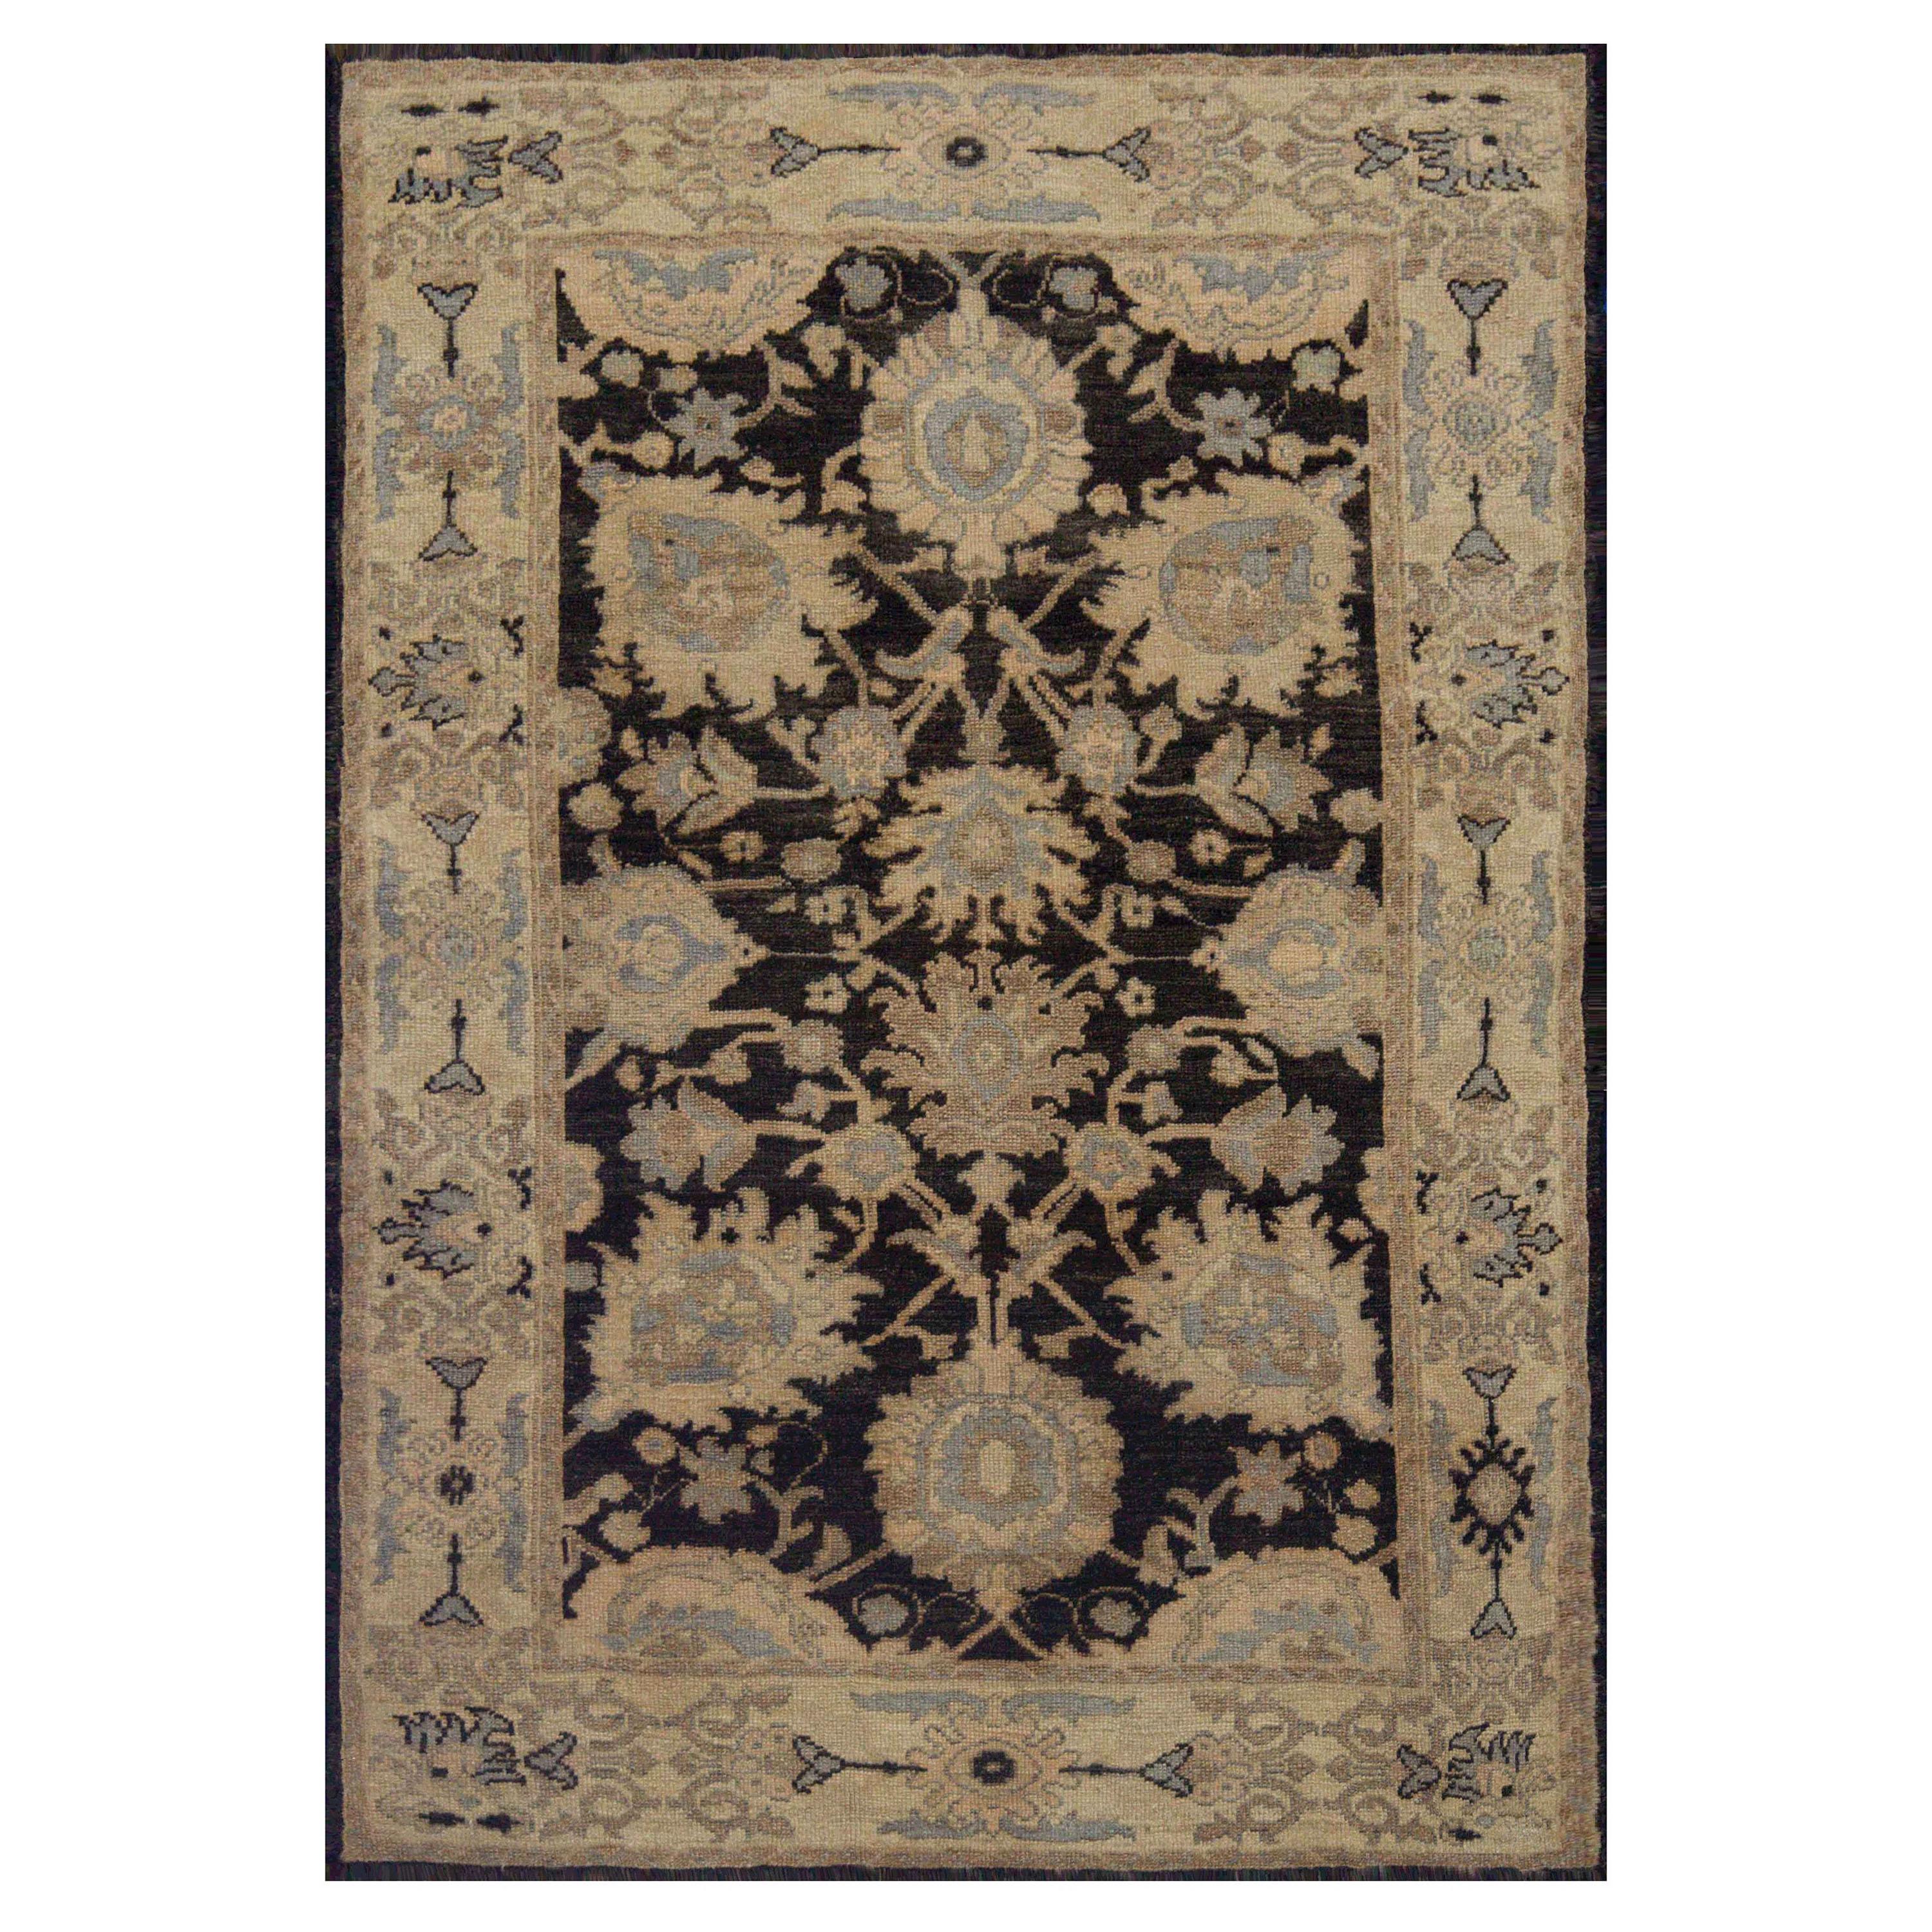 Contemporary Turkish Oushak Rug with Mixed Beige, Black and Gray Floral Details For Sale